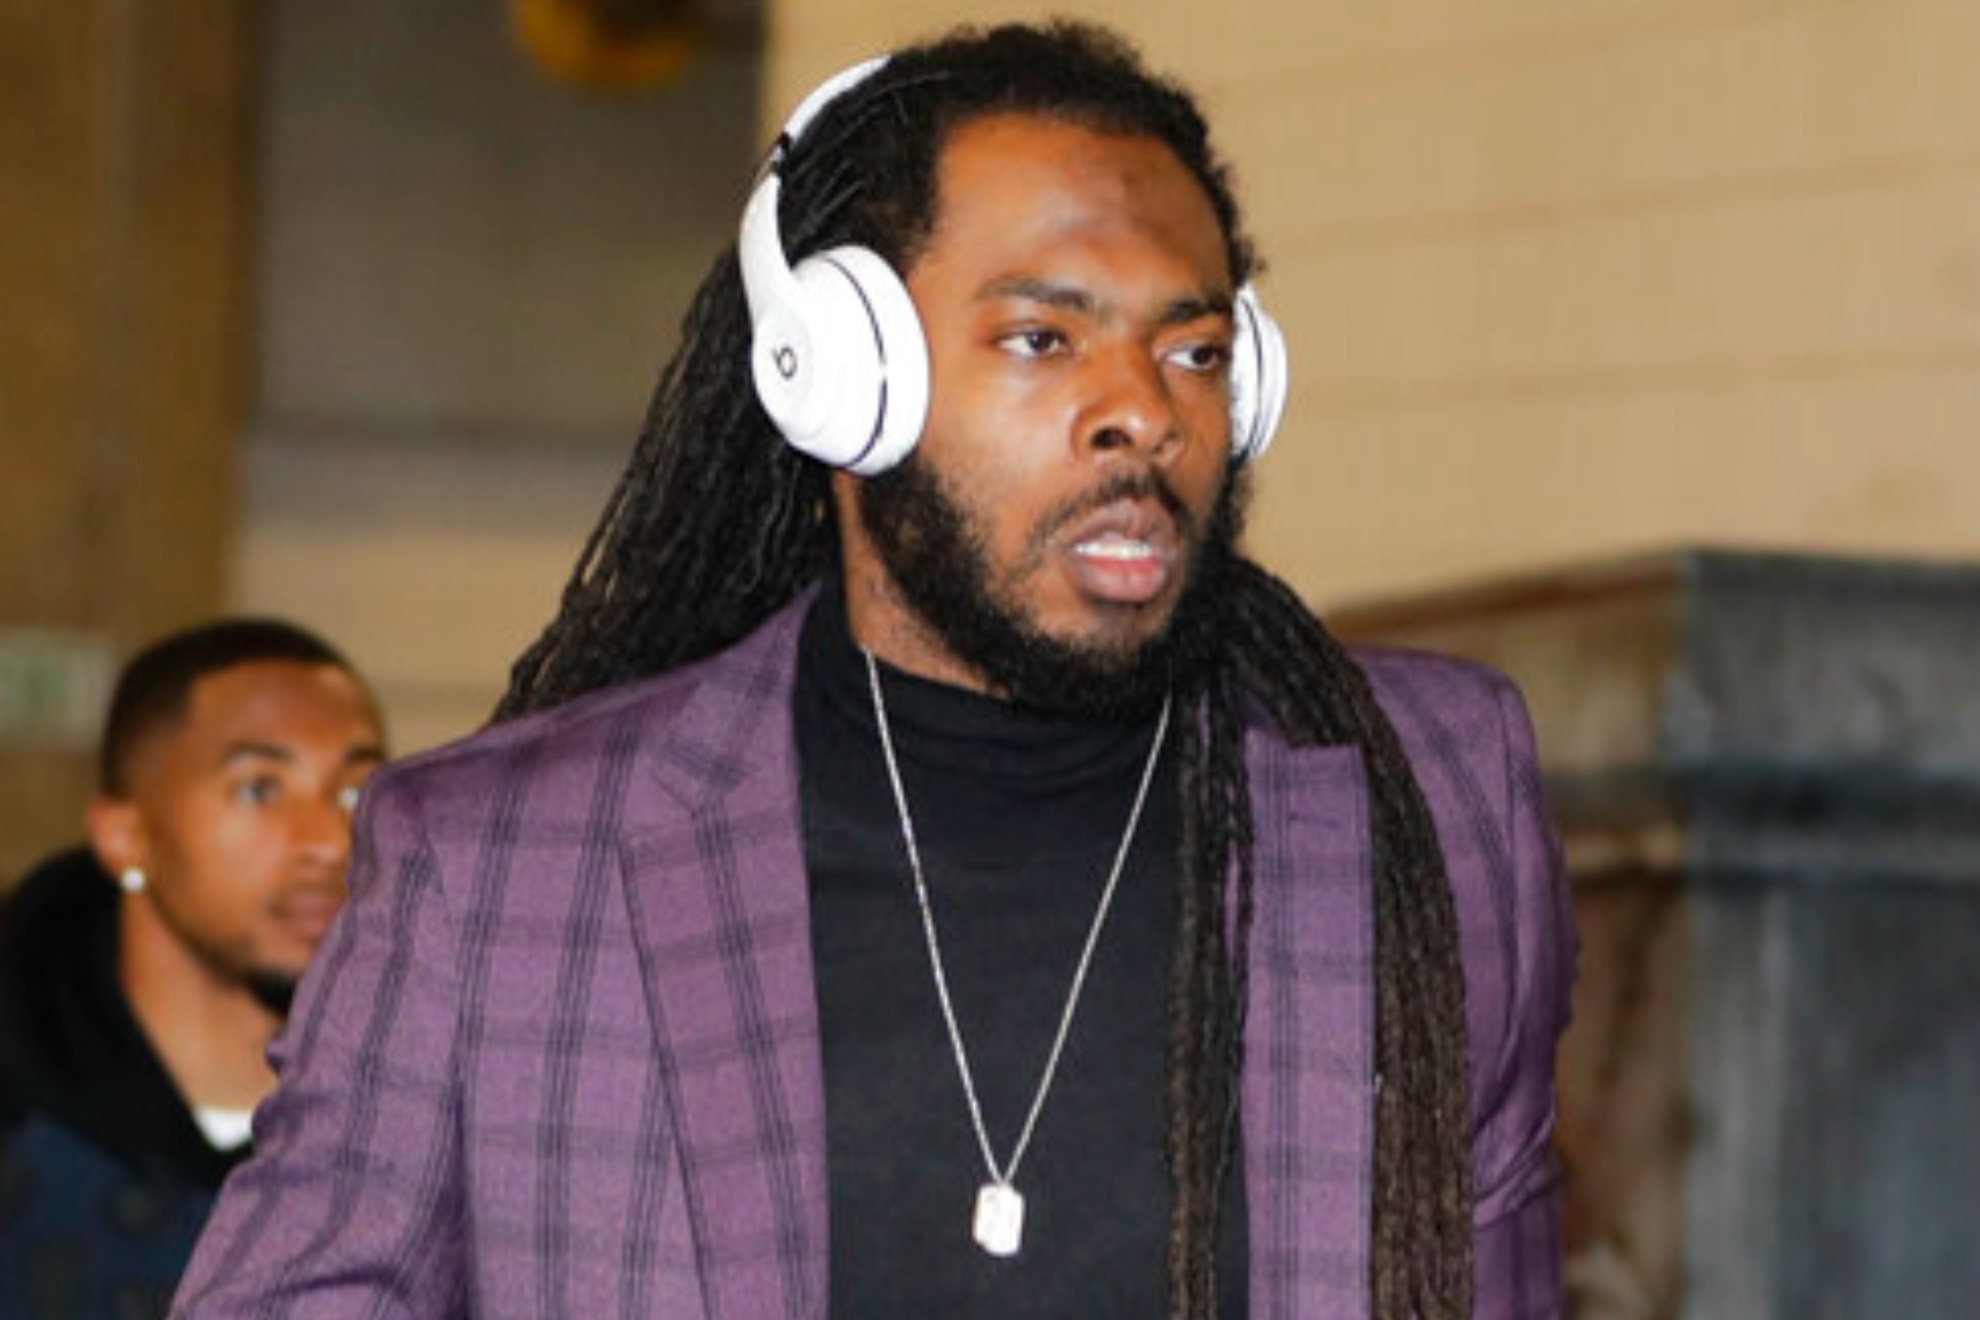 Richard Sherman is in legal trouble again after being arrested for a DUI